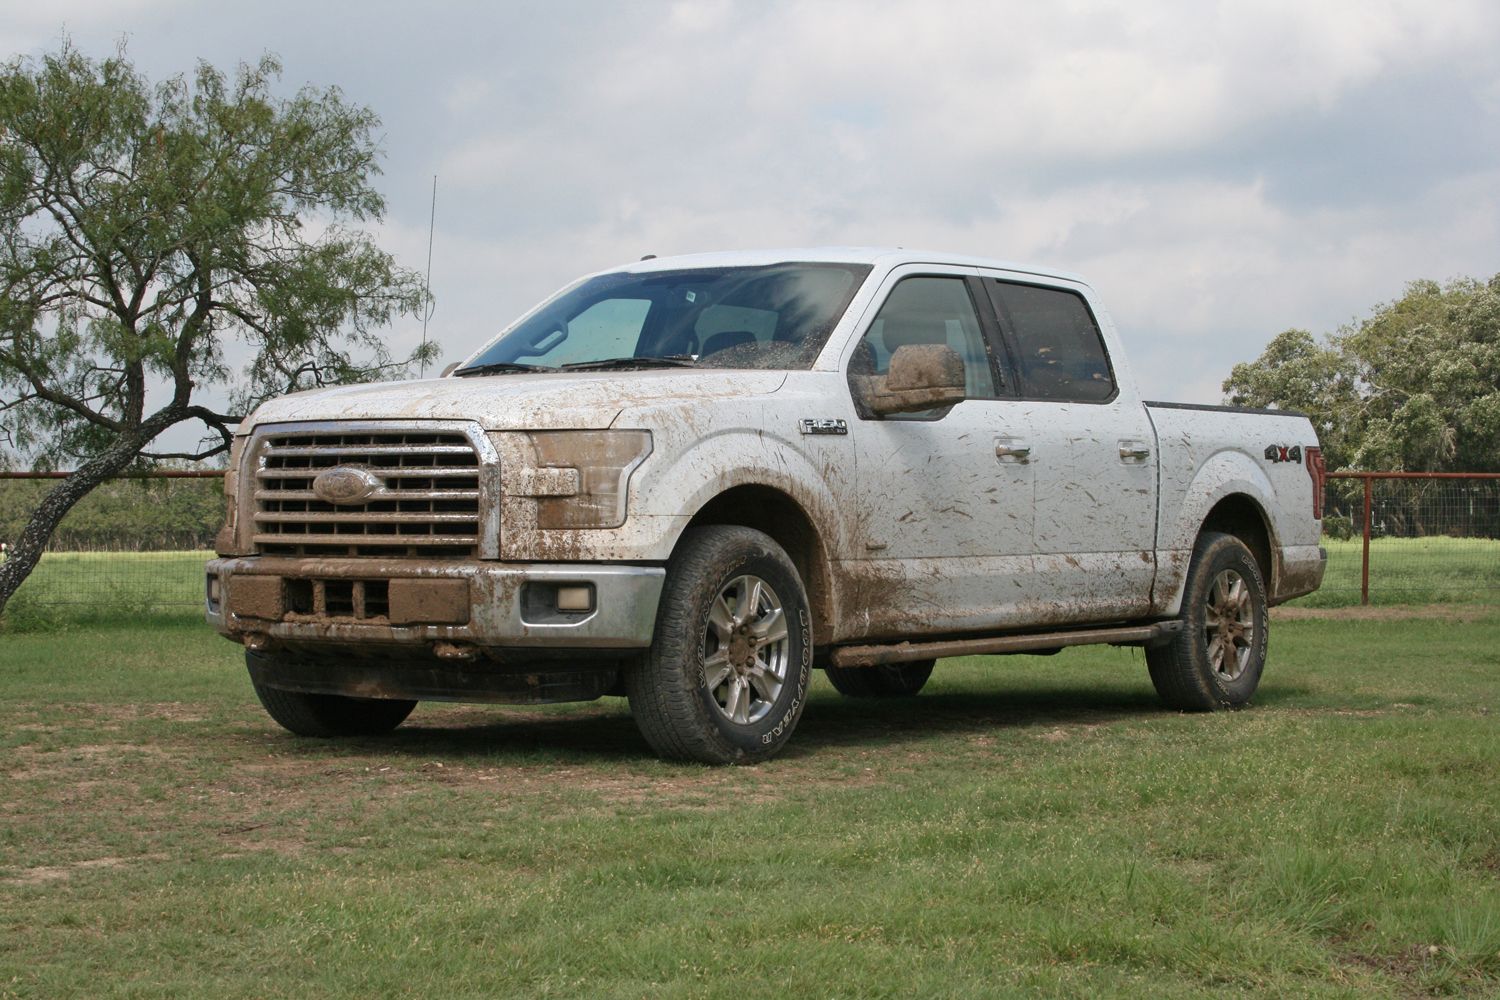 The brand new 2015 Ford F150 - Driven